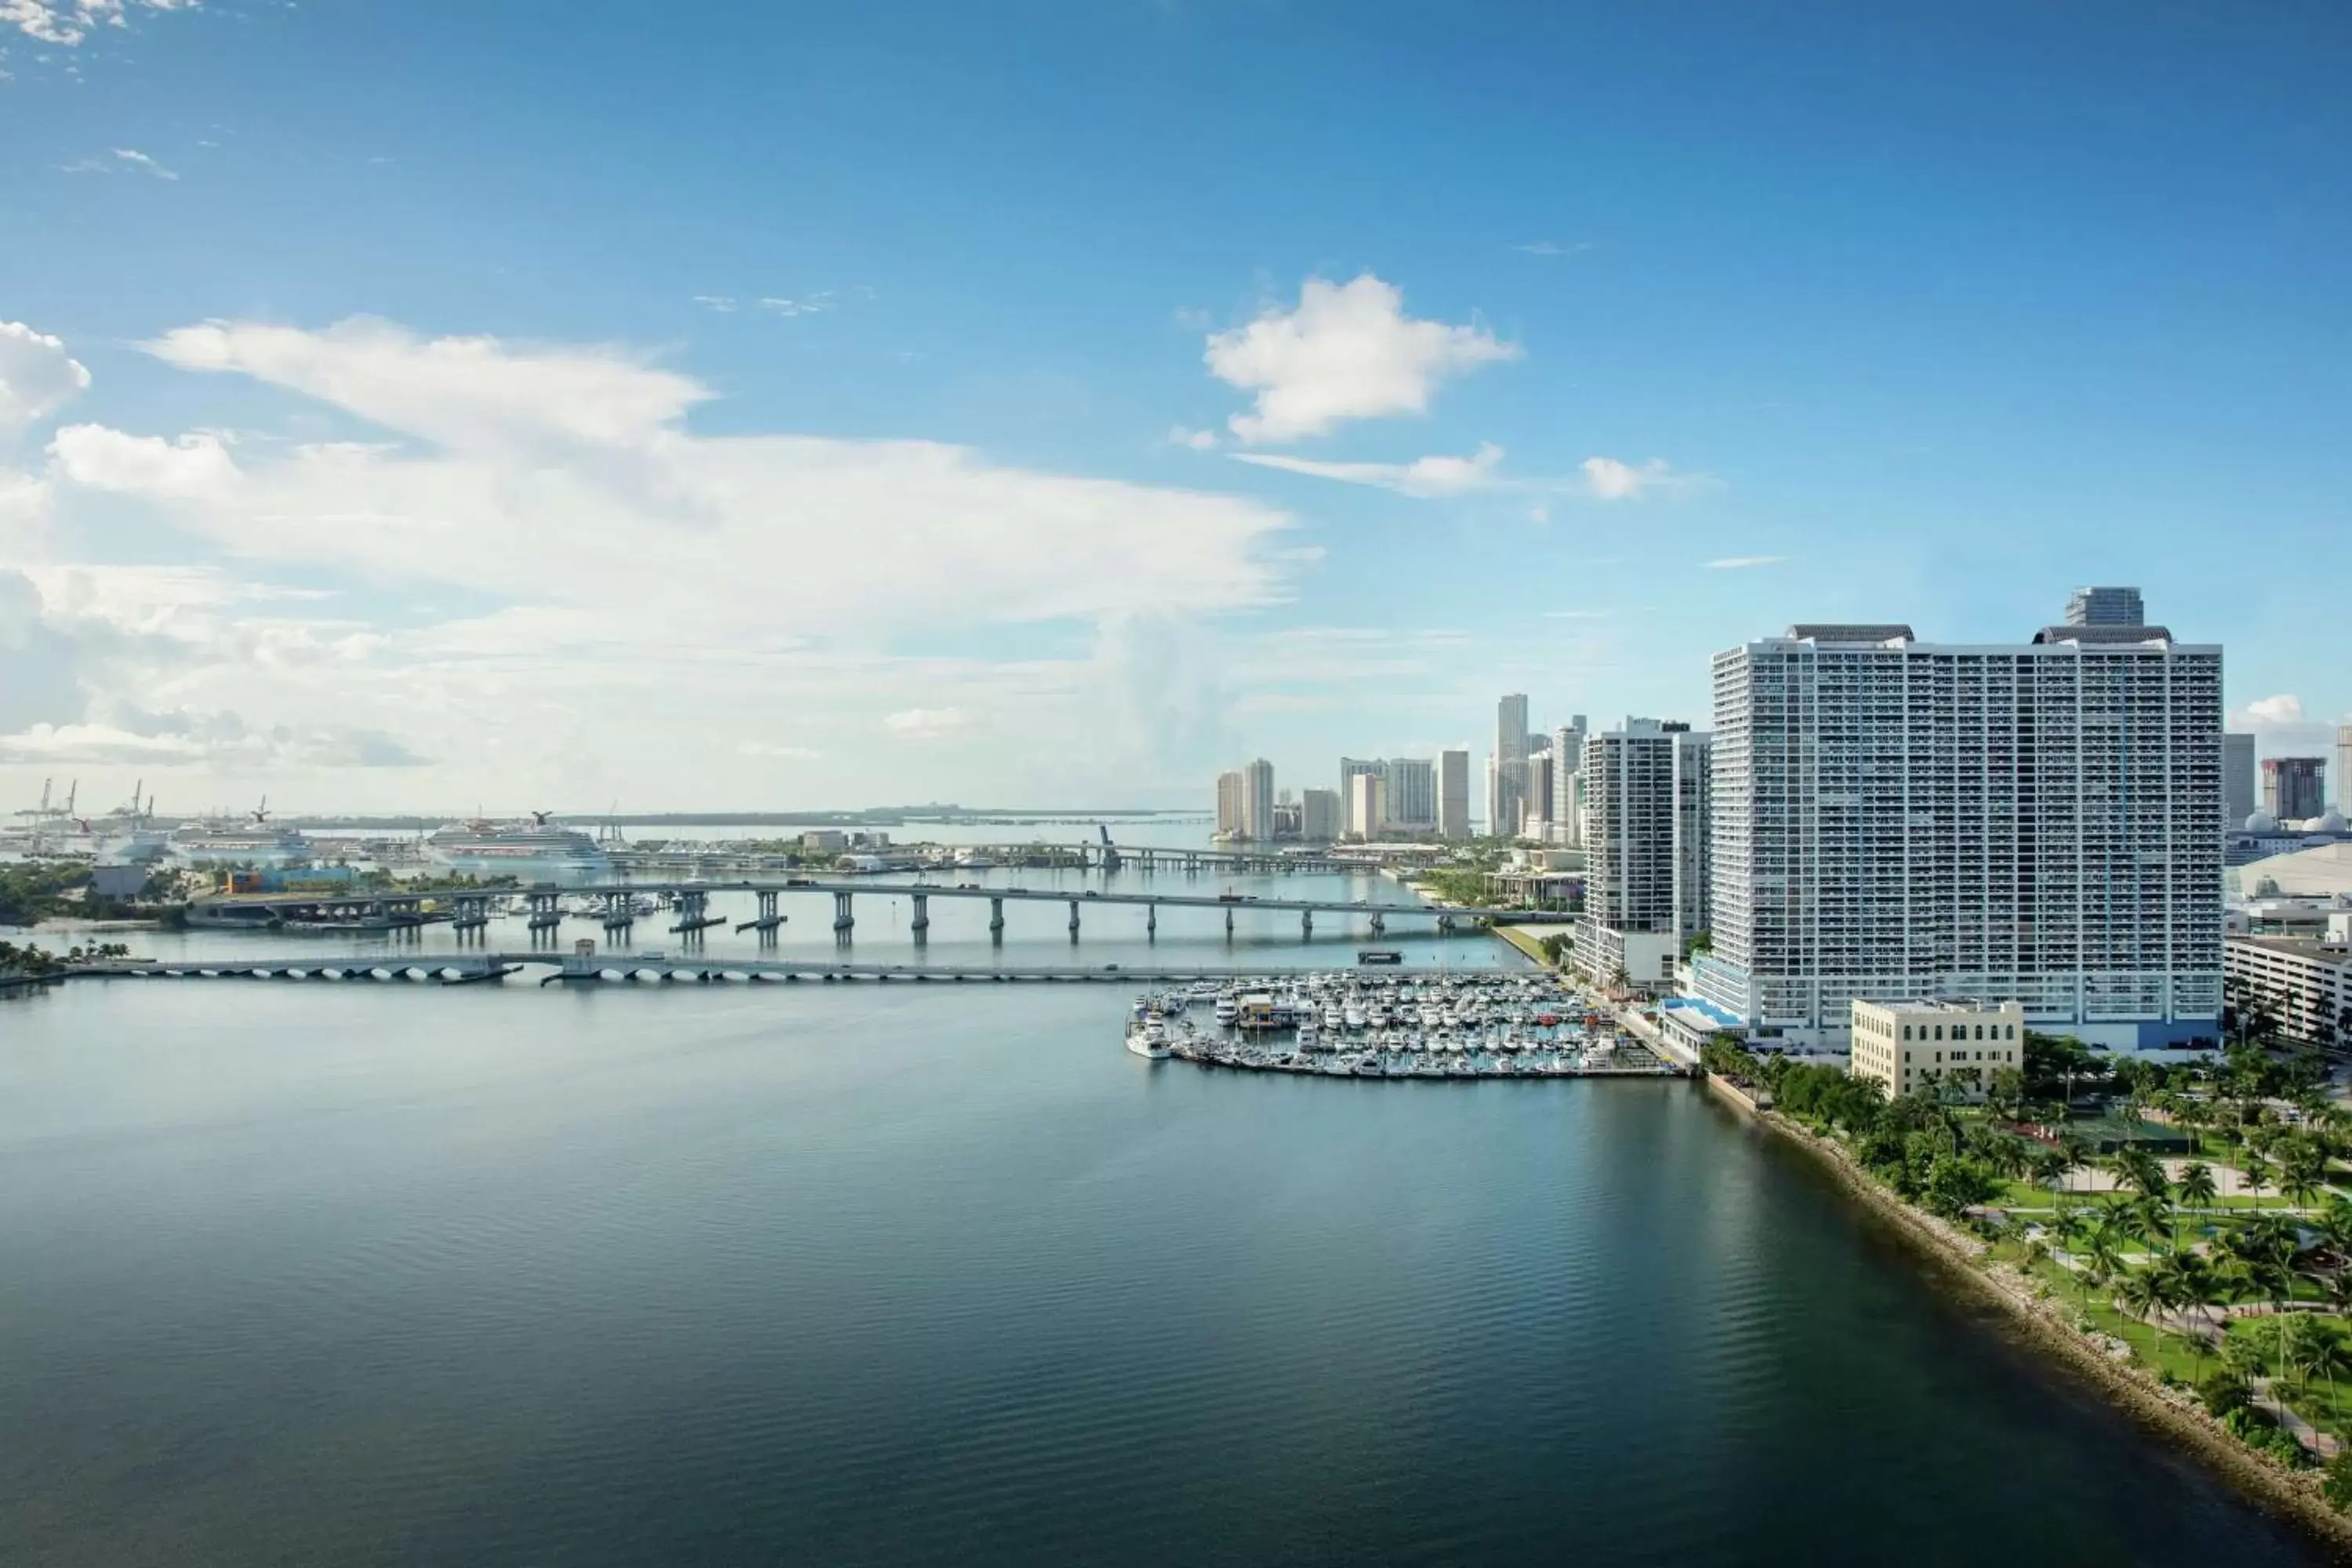 Property building in DoubleTree by Hilton Grand Hotel Biscayne Bay